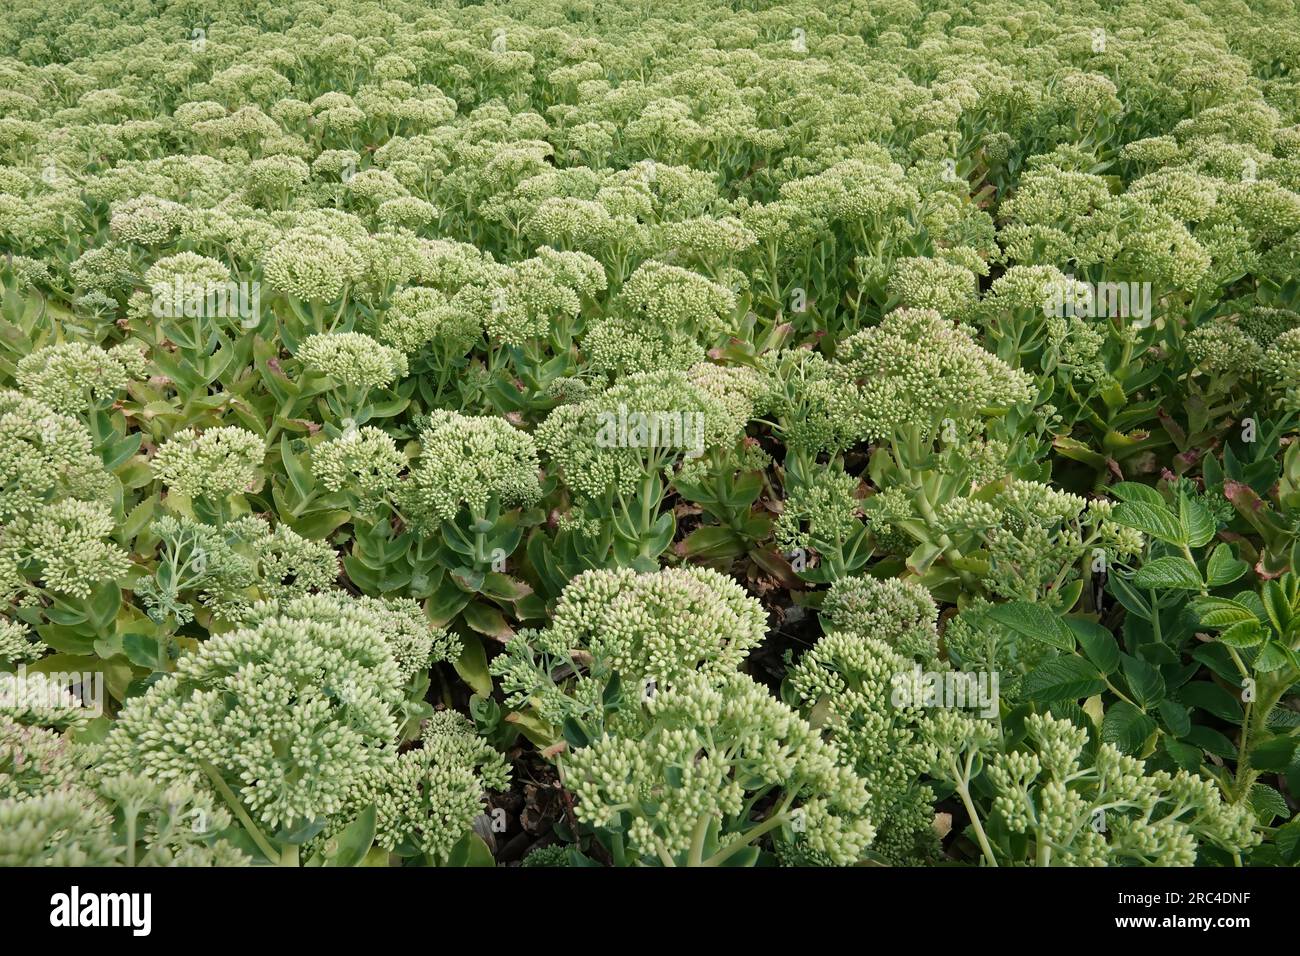 Closeup on an aggregation fo green flower buds of orpine or midsummer-men plants, Hylotelephium telephium on a sunny day Stock Photo